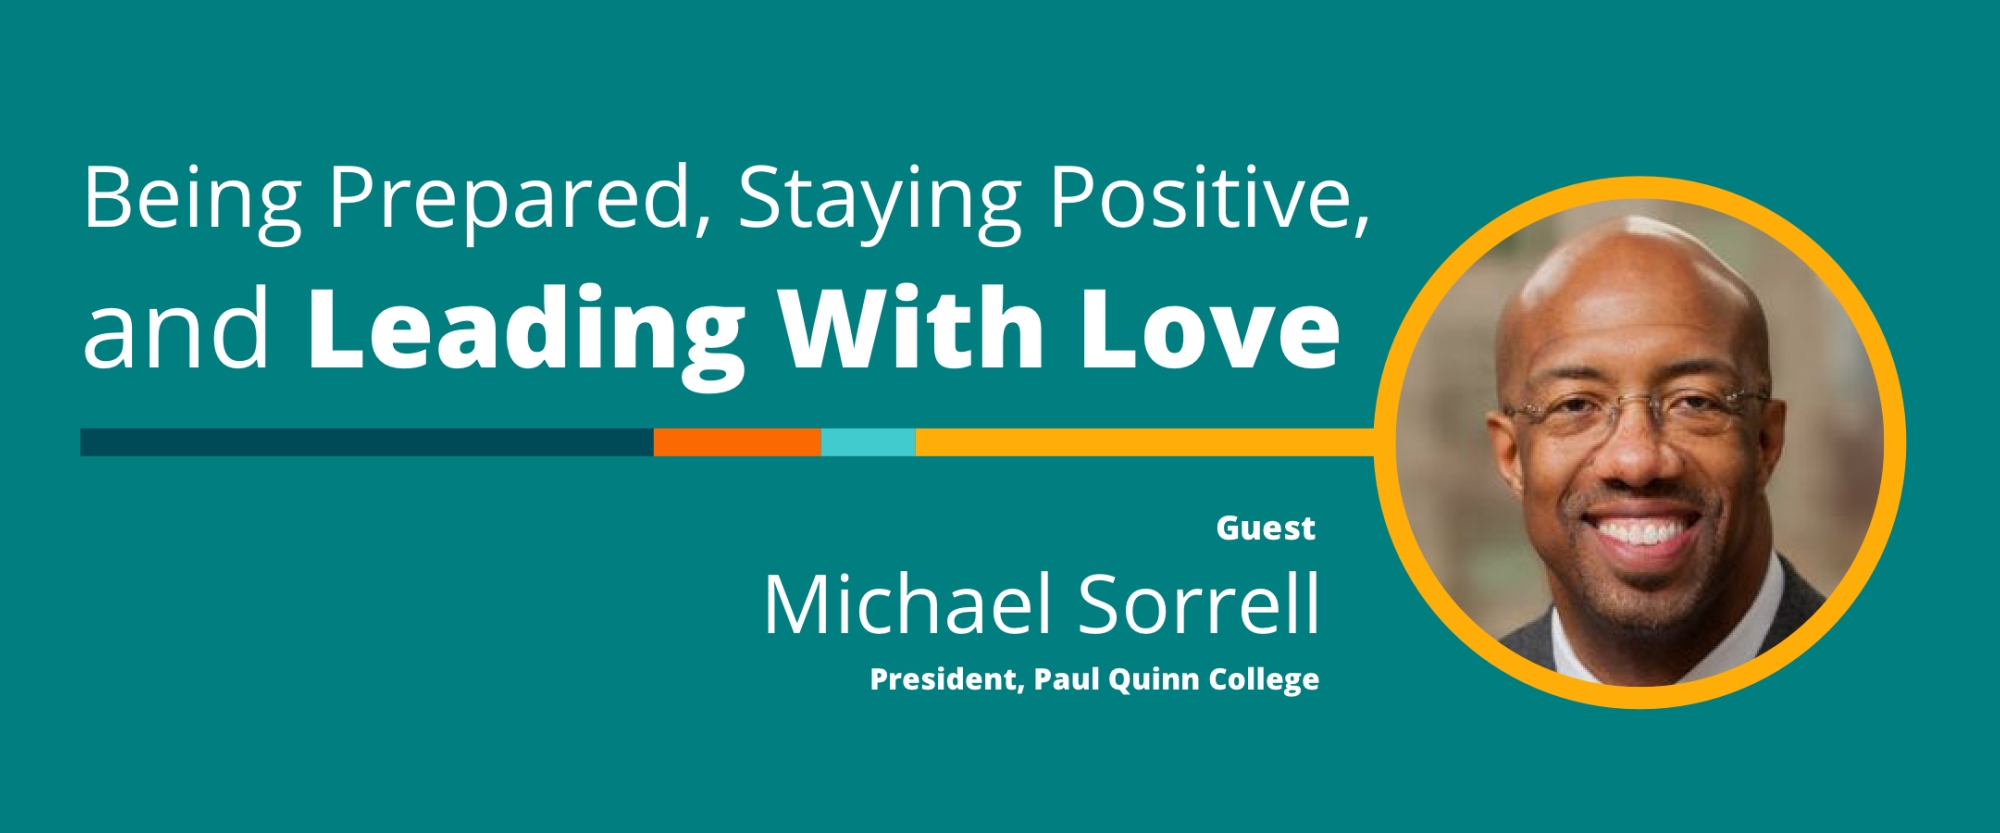 Being Prepared, Staying Positive, and Leading With Love